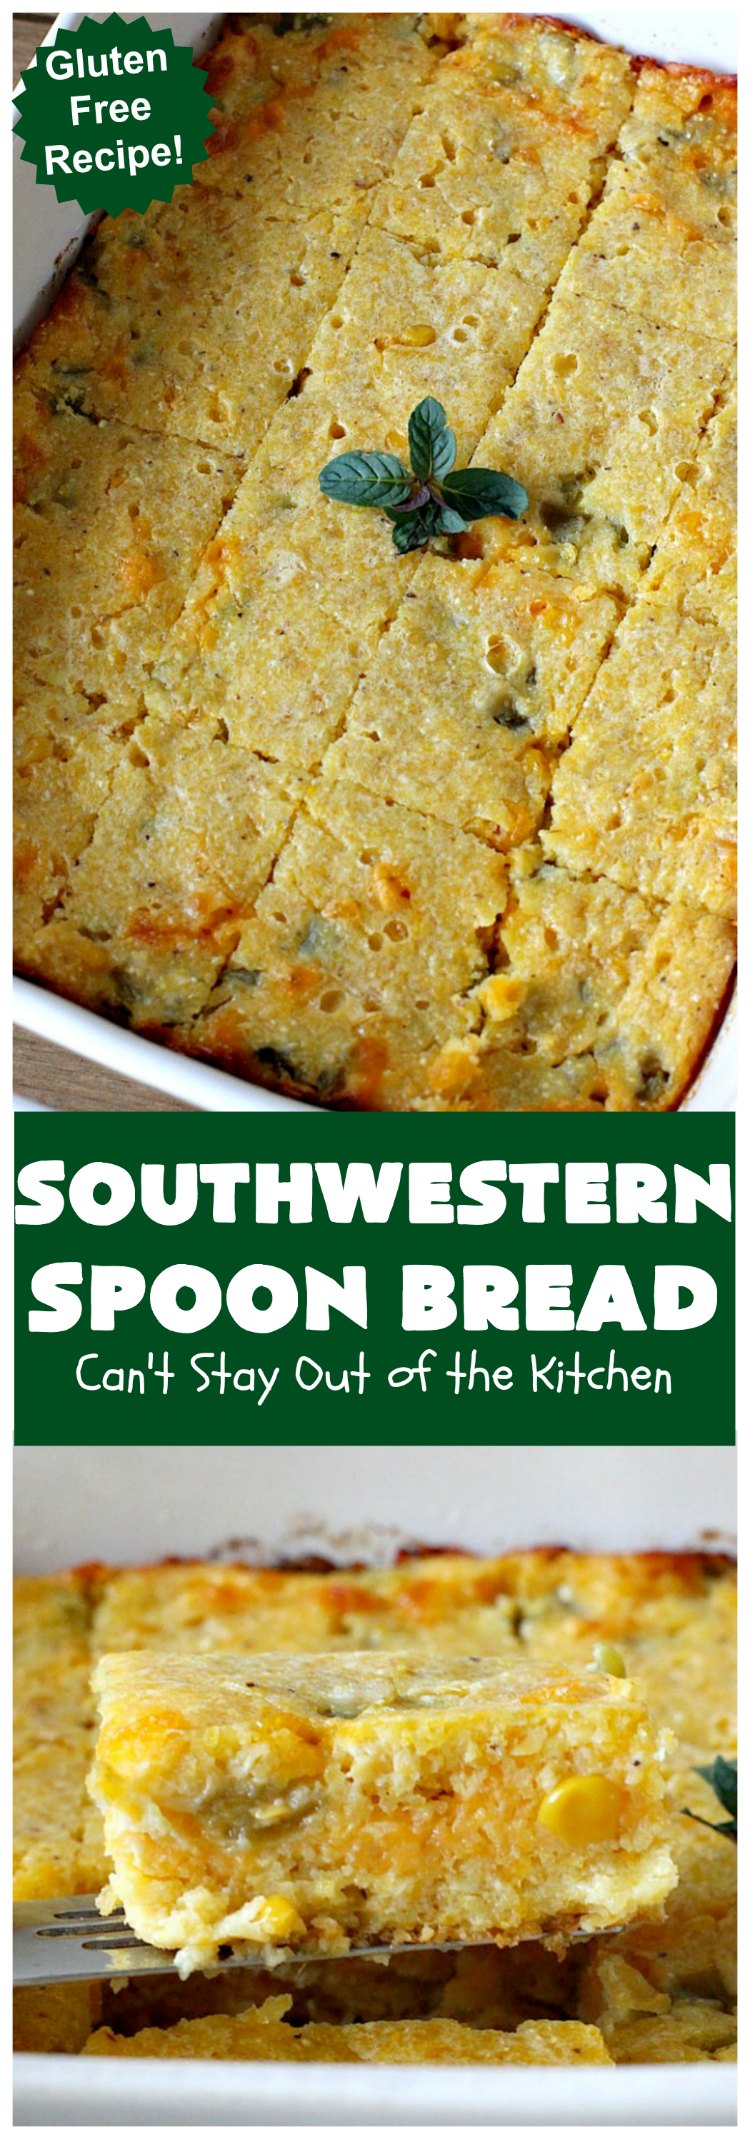 Southwestern Spoon Bread | Can't Stay Out of the Kitchen